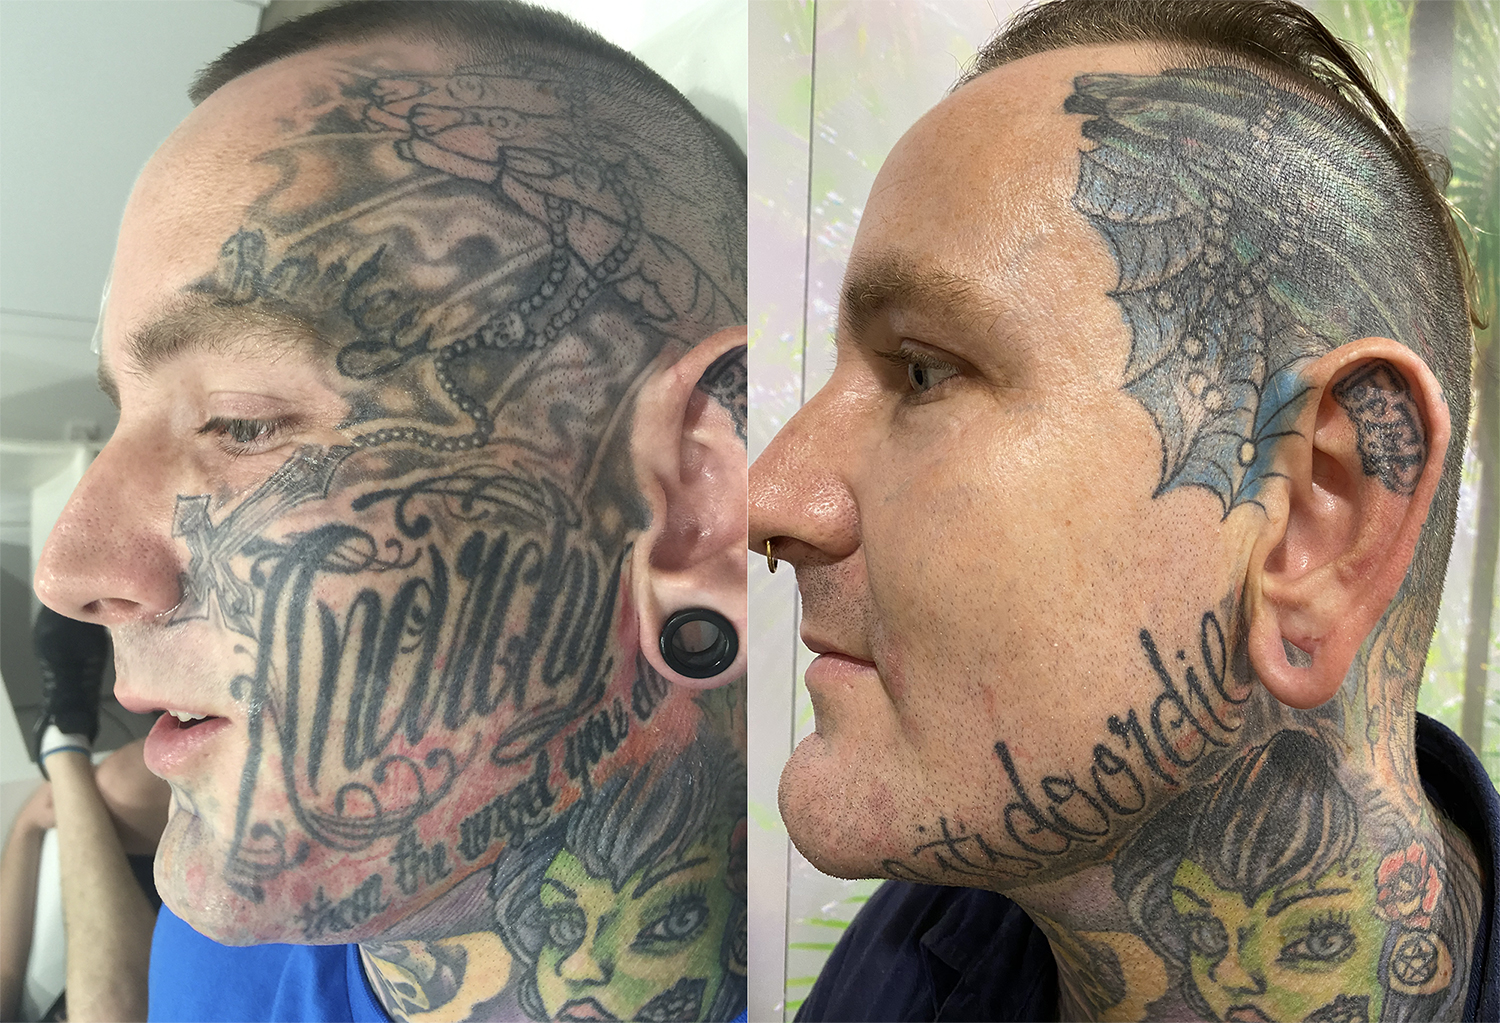 NonLaser Tattoo Removal  February 15 2018  Brannick Clinic of Natural  Medicine